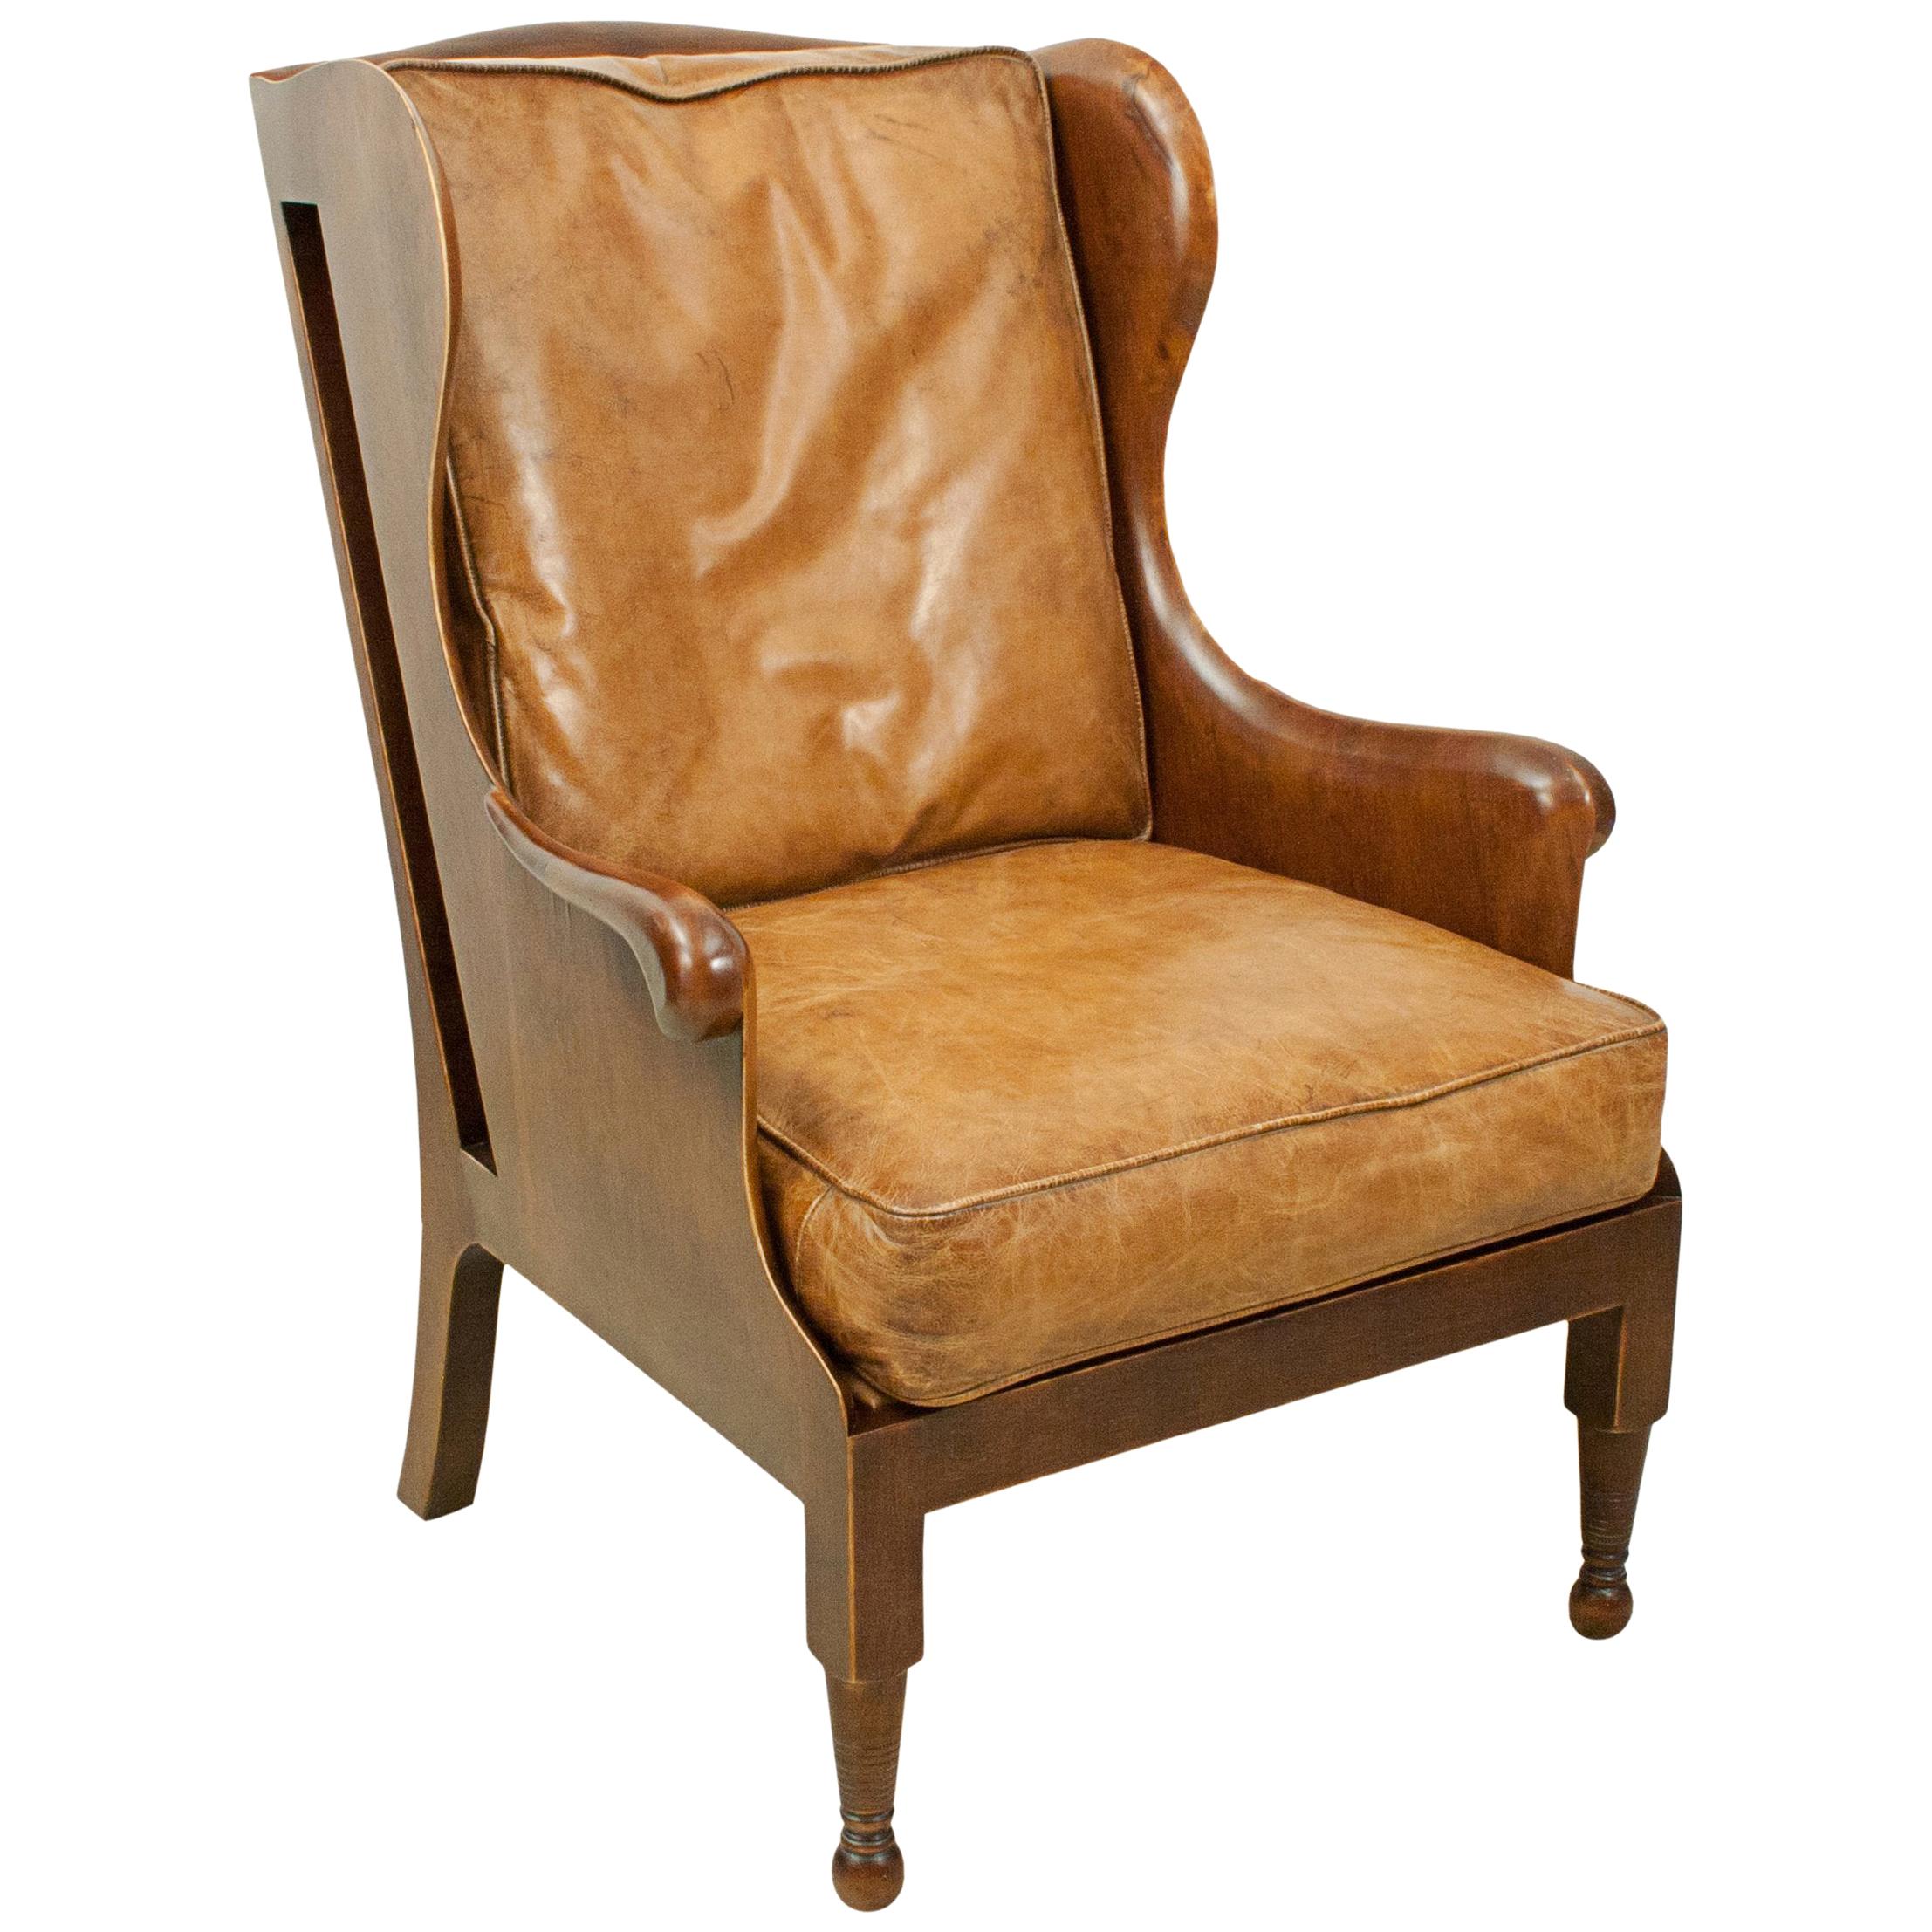 Traditional Style Mahogany and Tan Leather Wing Armchair, Loose Cushions